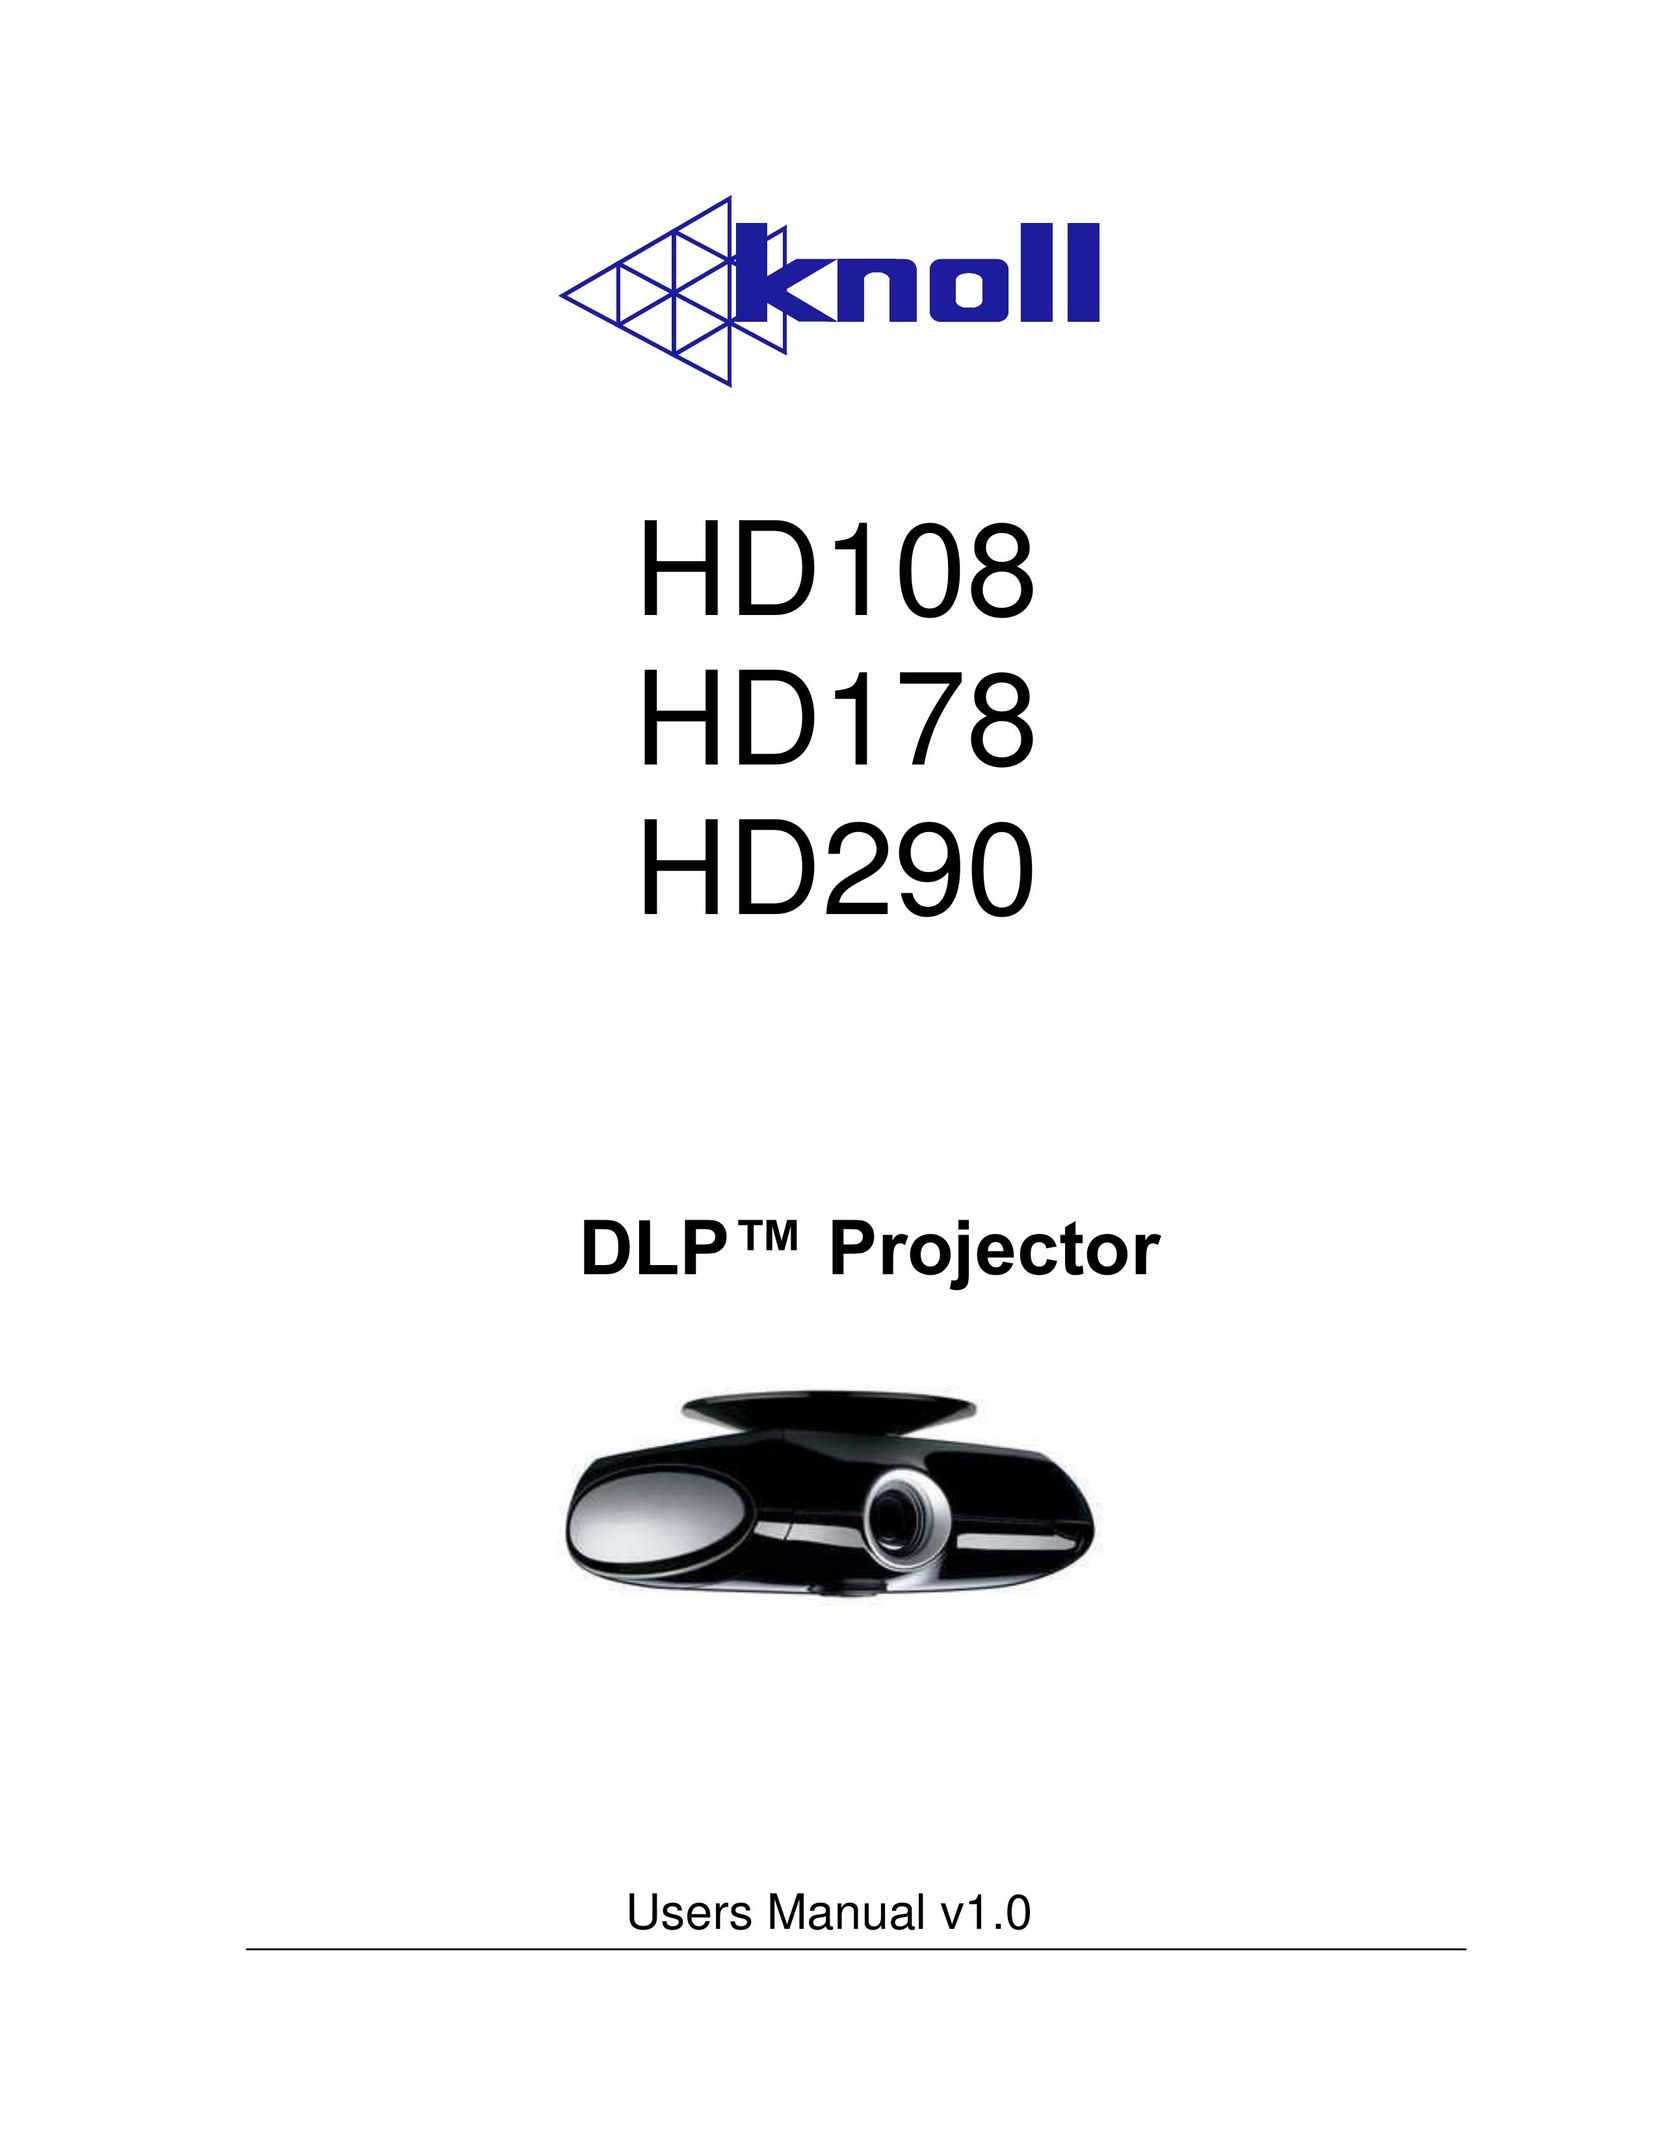 Knoll Systems HD108 Computer Accessories User Manual